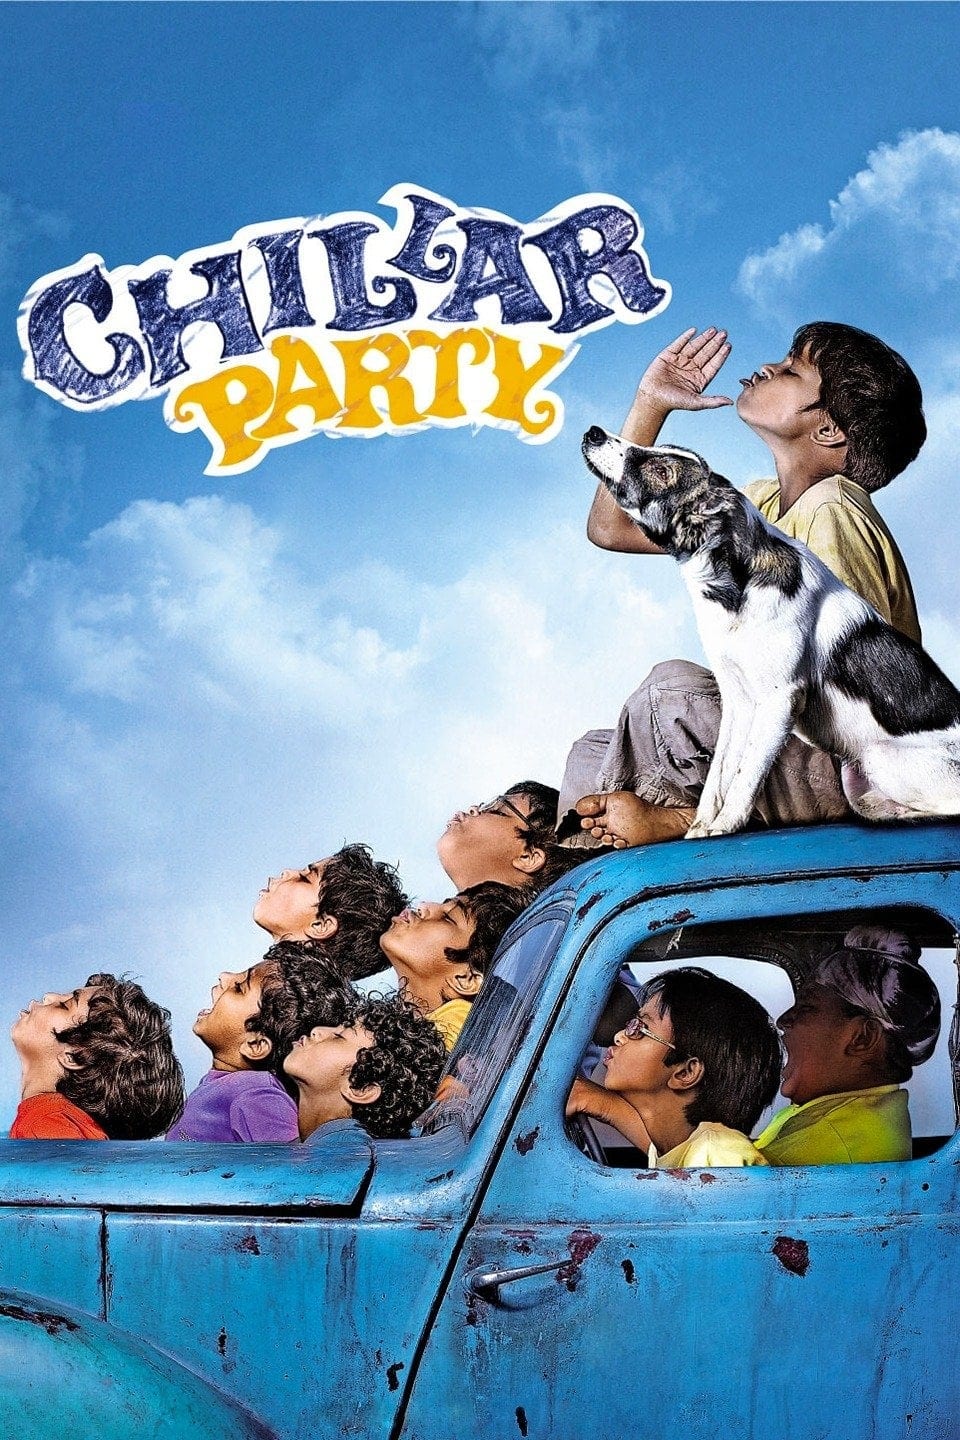 Poster for the movie "Chillar Party"